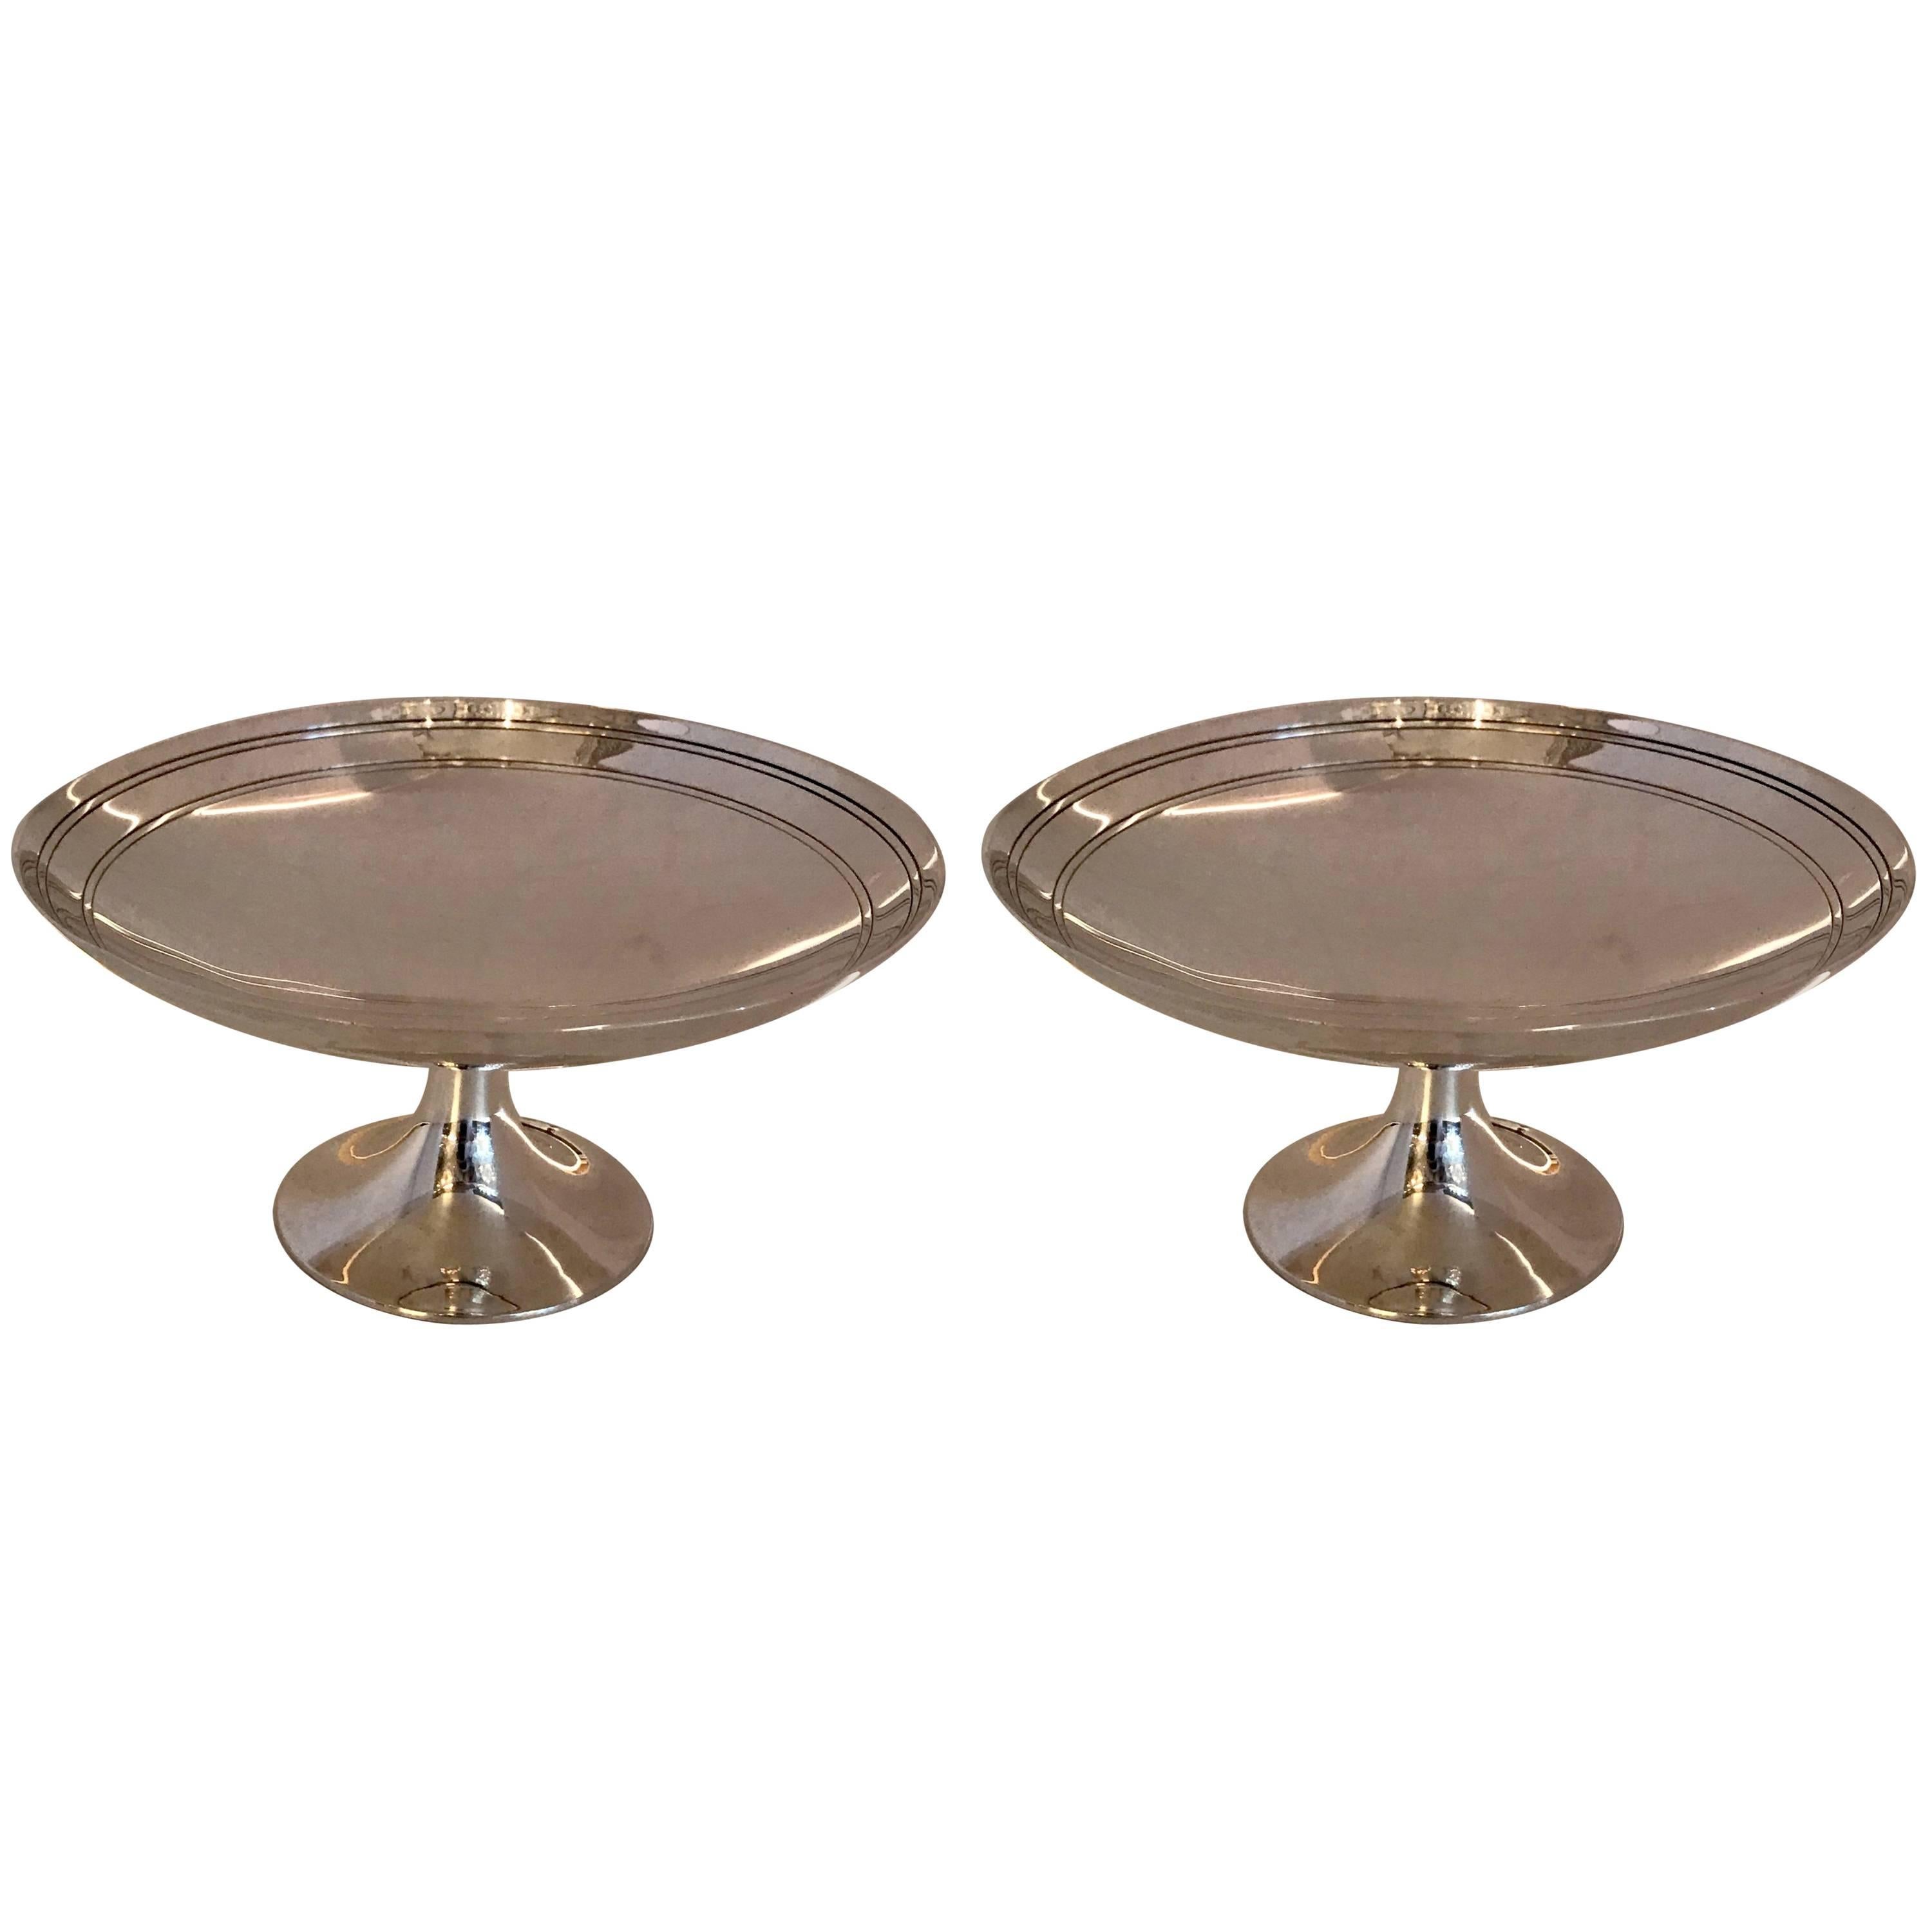 Wonderful Pair Mid-Century Modern Tiffany & Co. Sterling Silver Compotes / Bowls For Sale